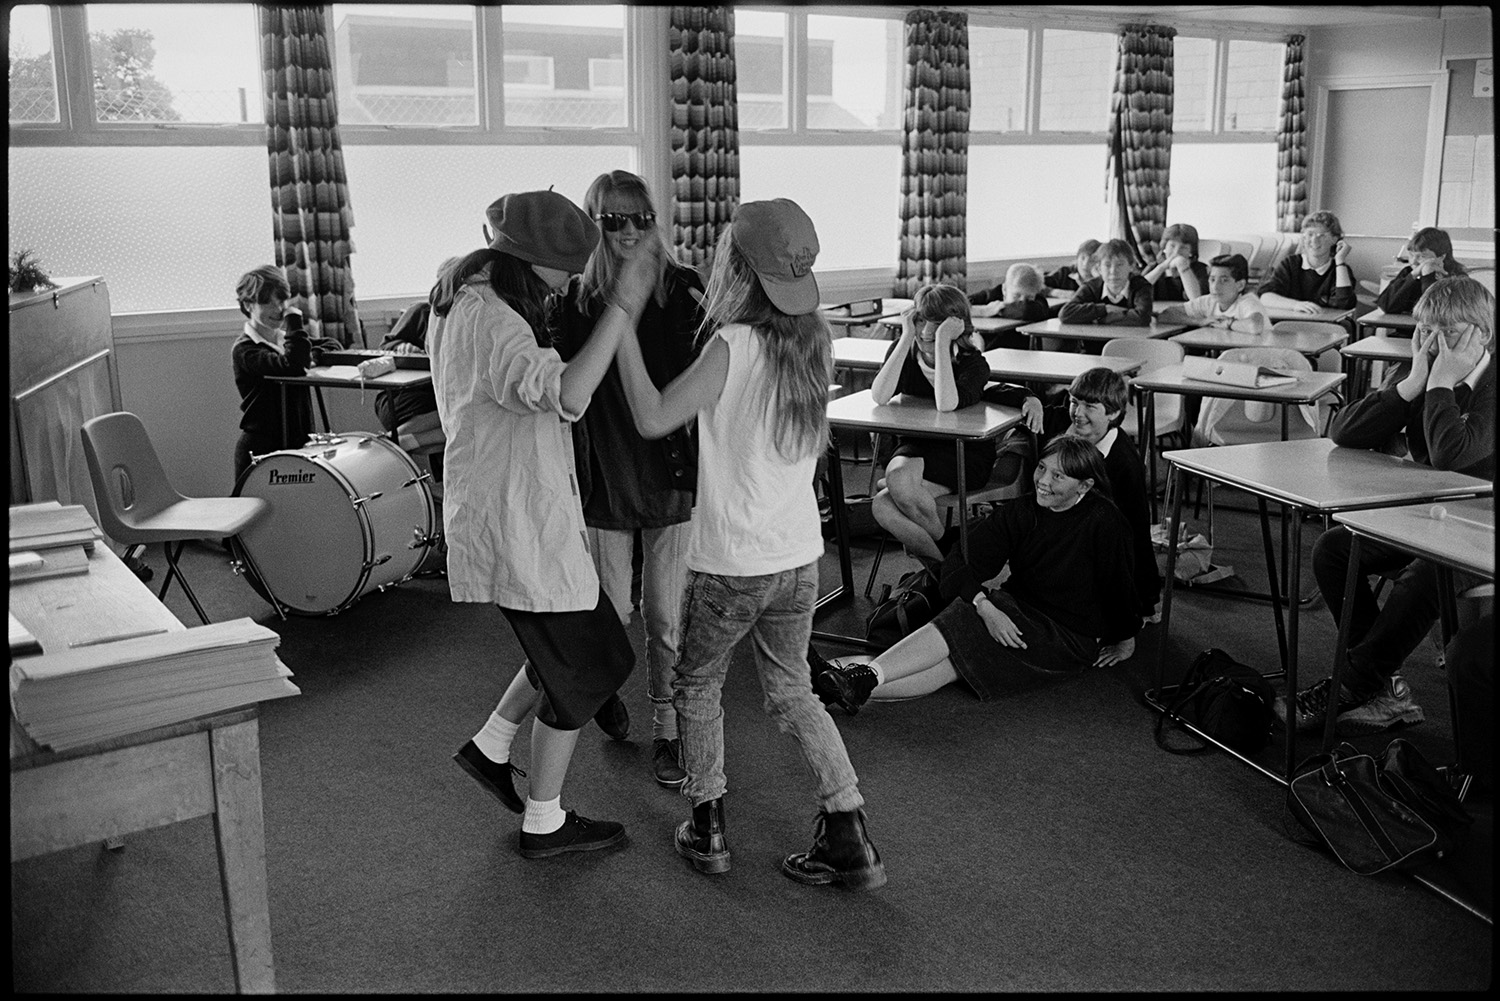 Classroom with pupils acting out short play. 
[Three pupils acting out a short play in a classroom at Chulmleigh Community College. The other students are watching them. A bass drum is also visible in the classroom.]